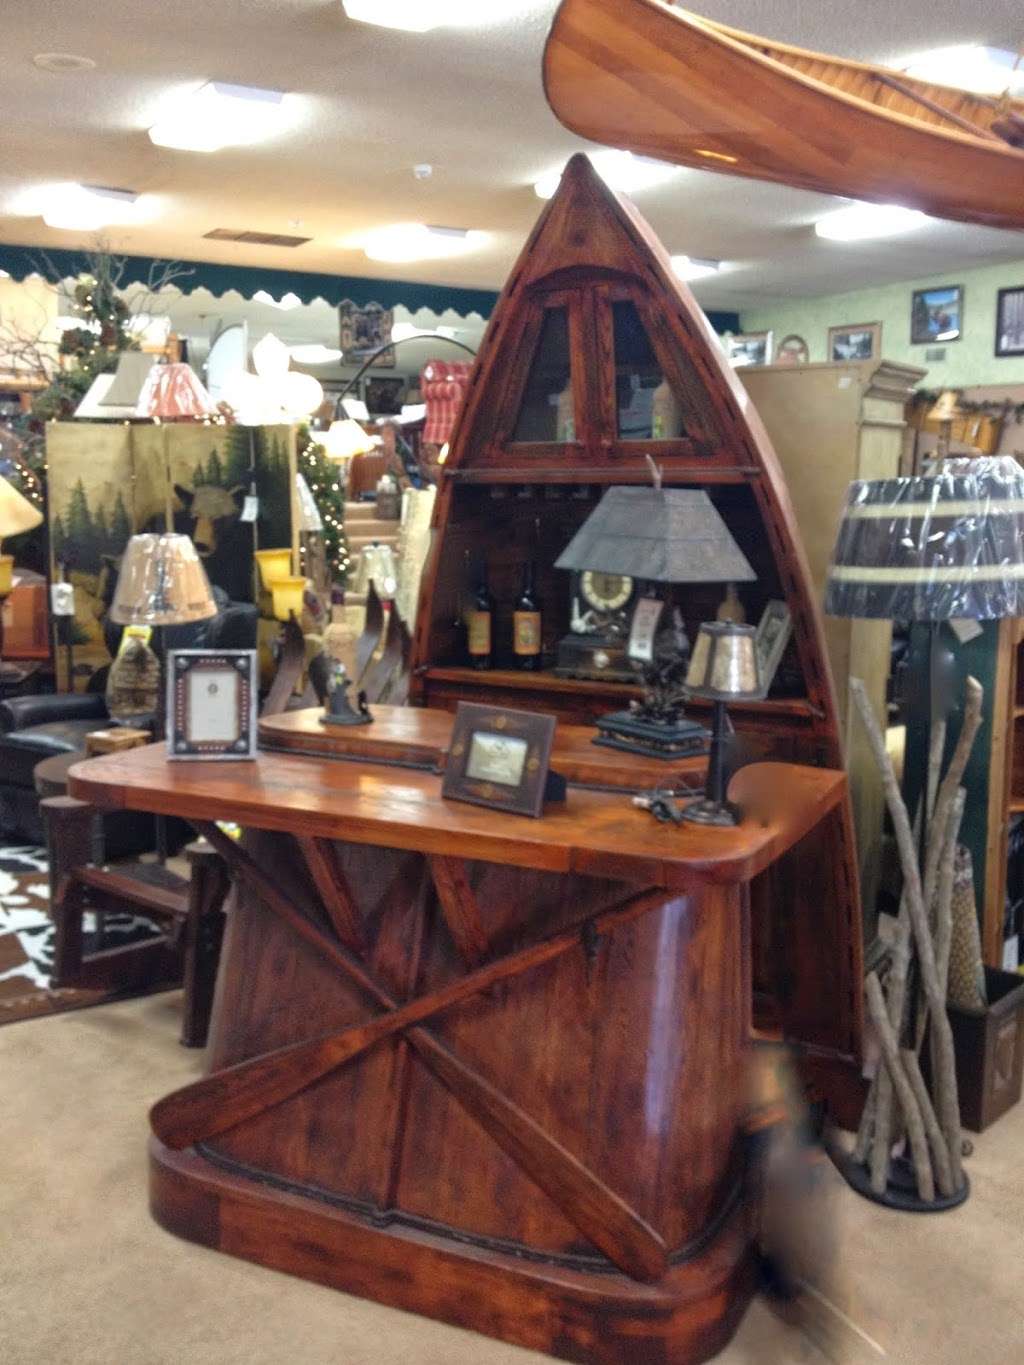 Country Furniture | 27240 CA-189, Blue Jay, CA 92317, USA | Phone: (909) 337-2407